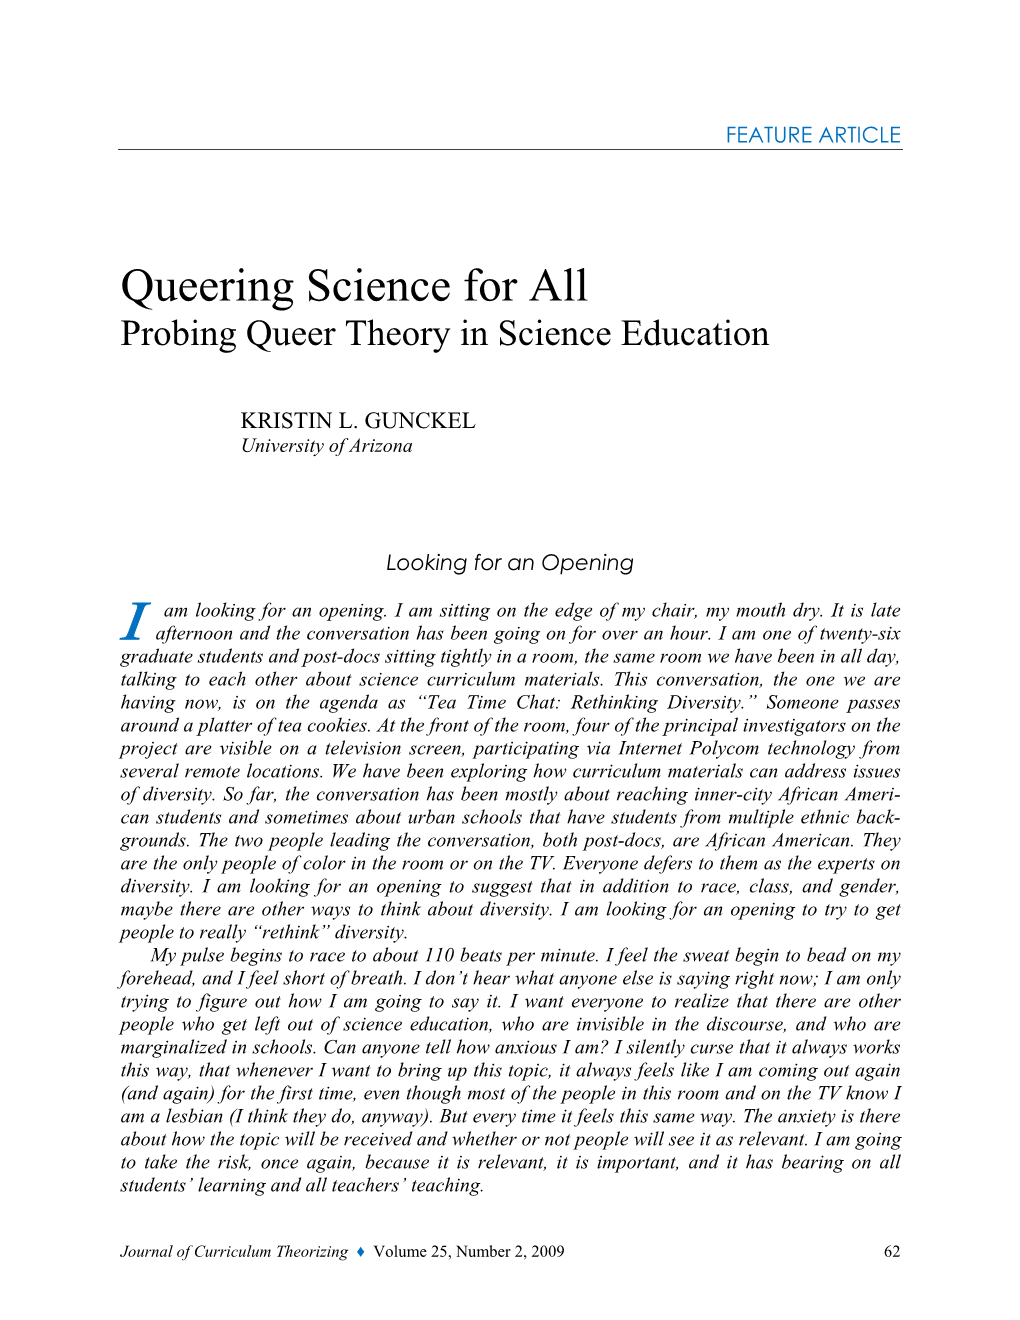 Queering Science for All Probing Queer Theory in Science Education